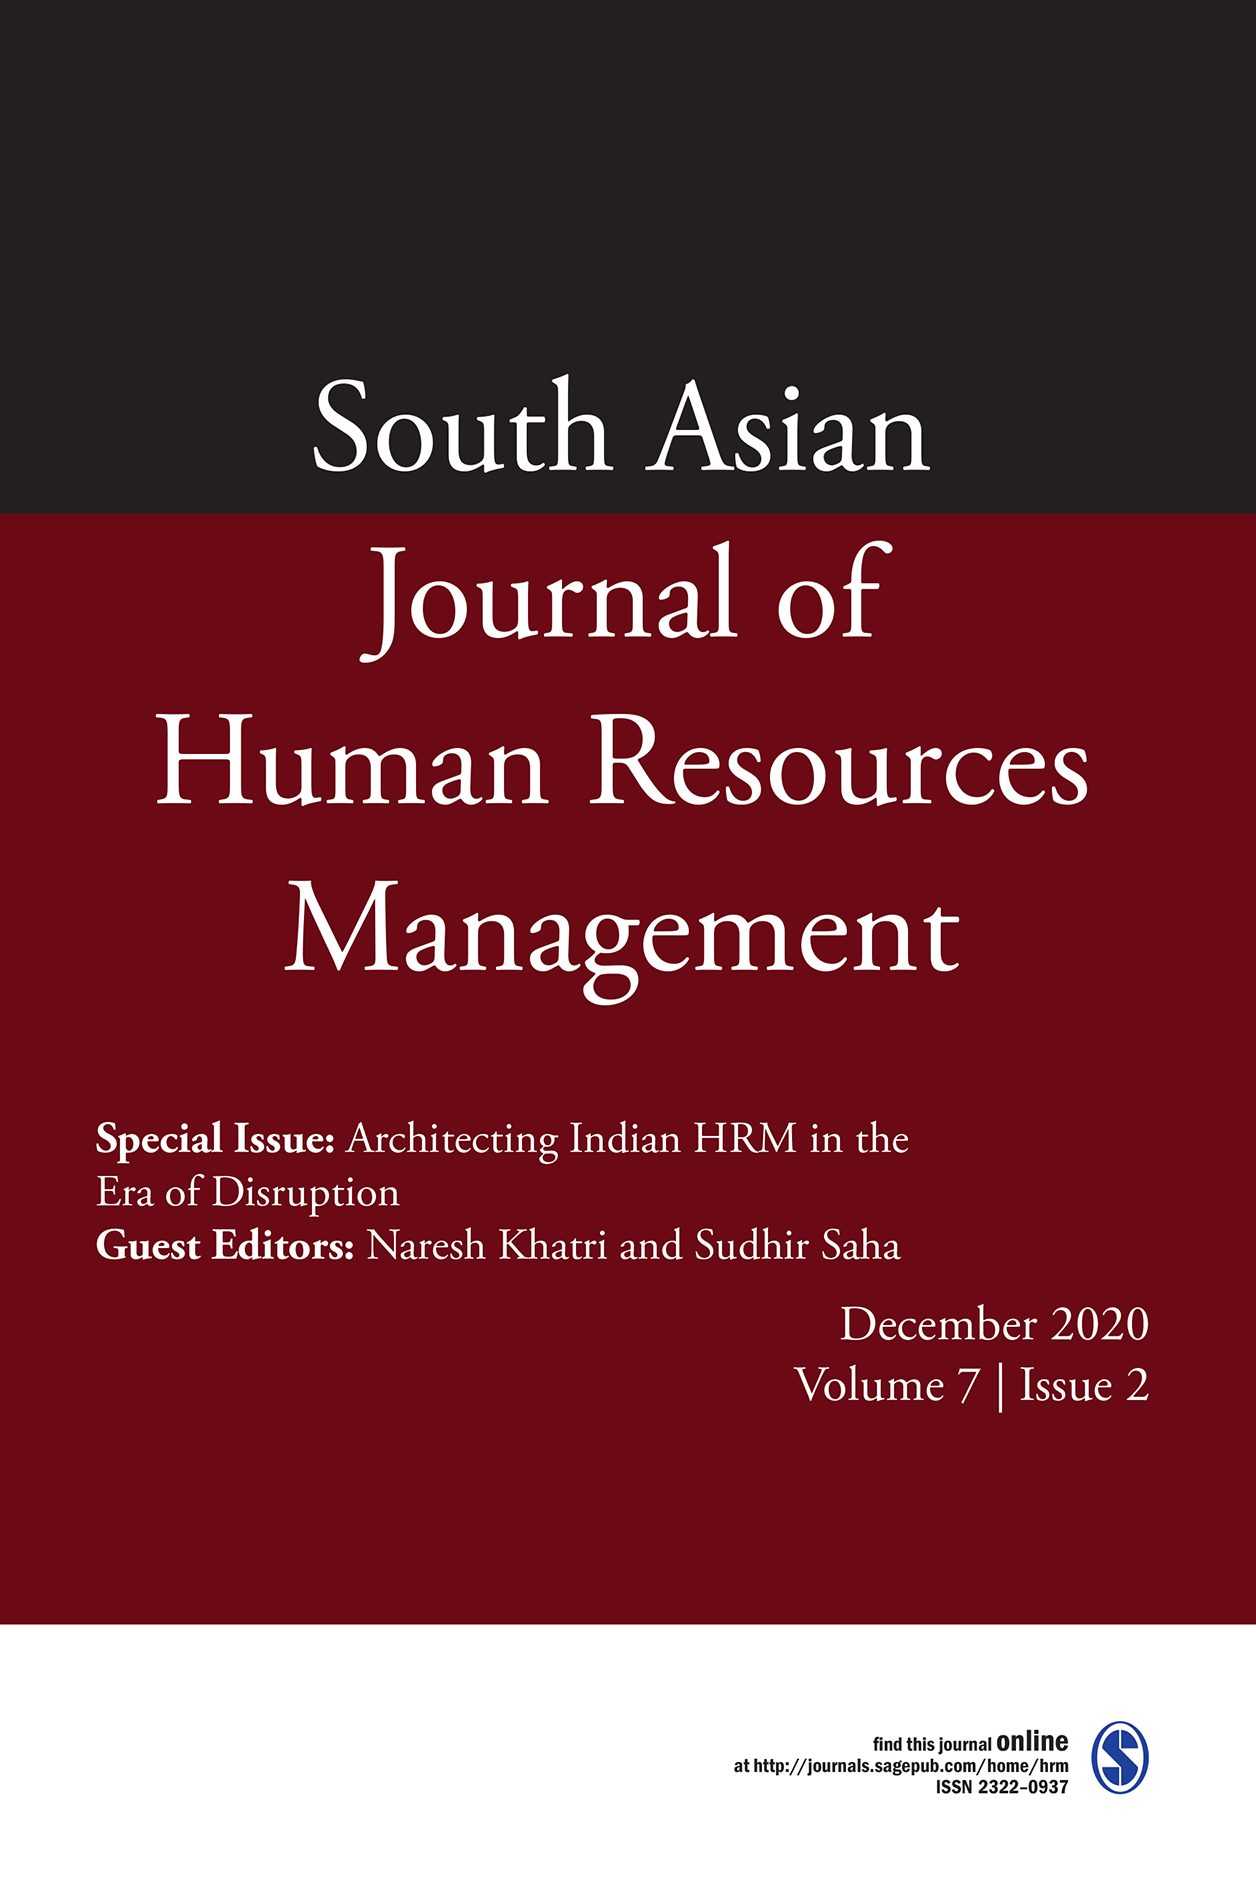 South Asian Journal of Human Resources Management